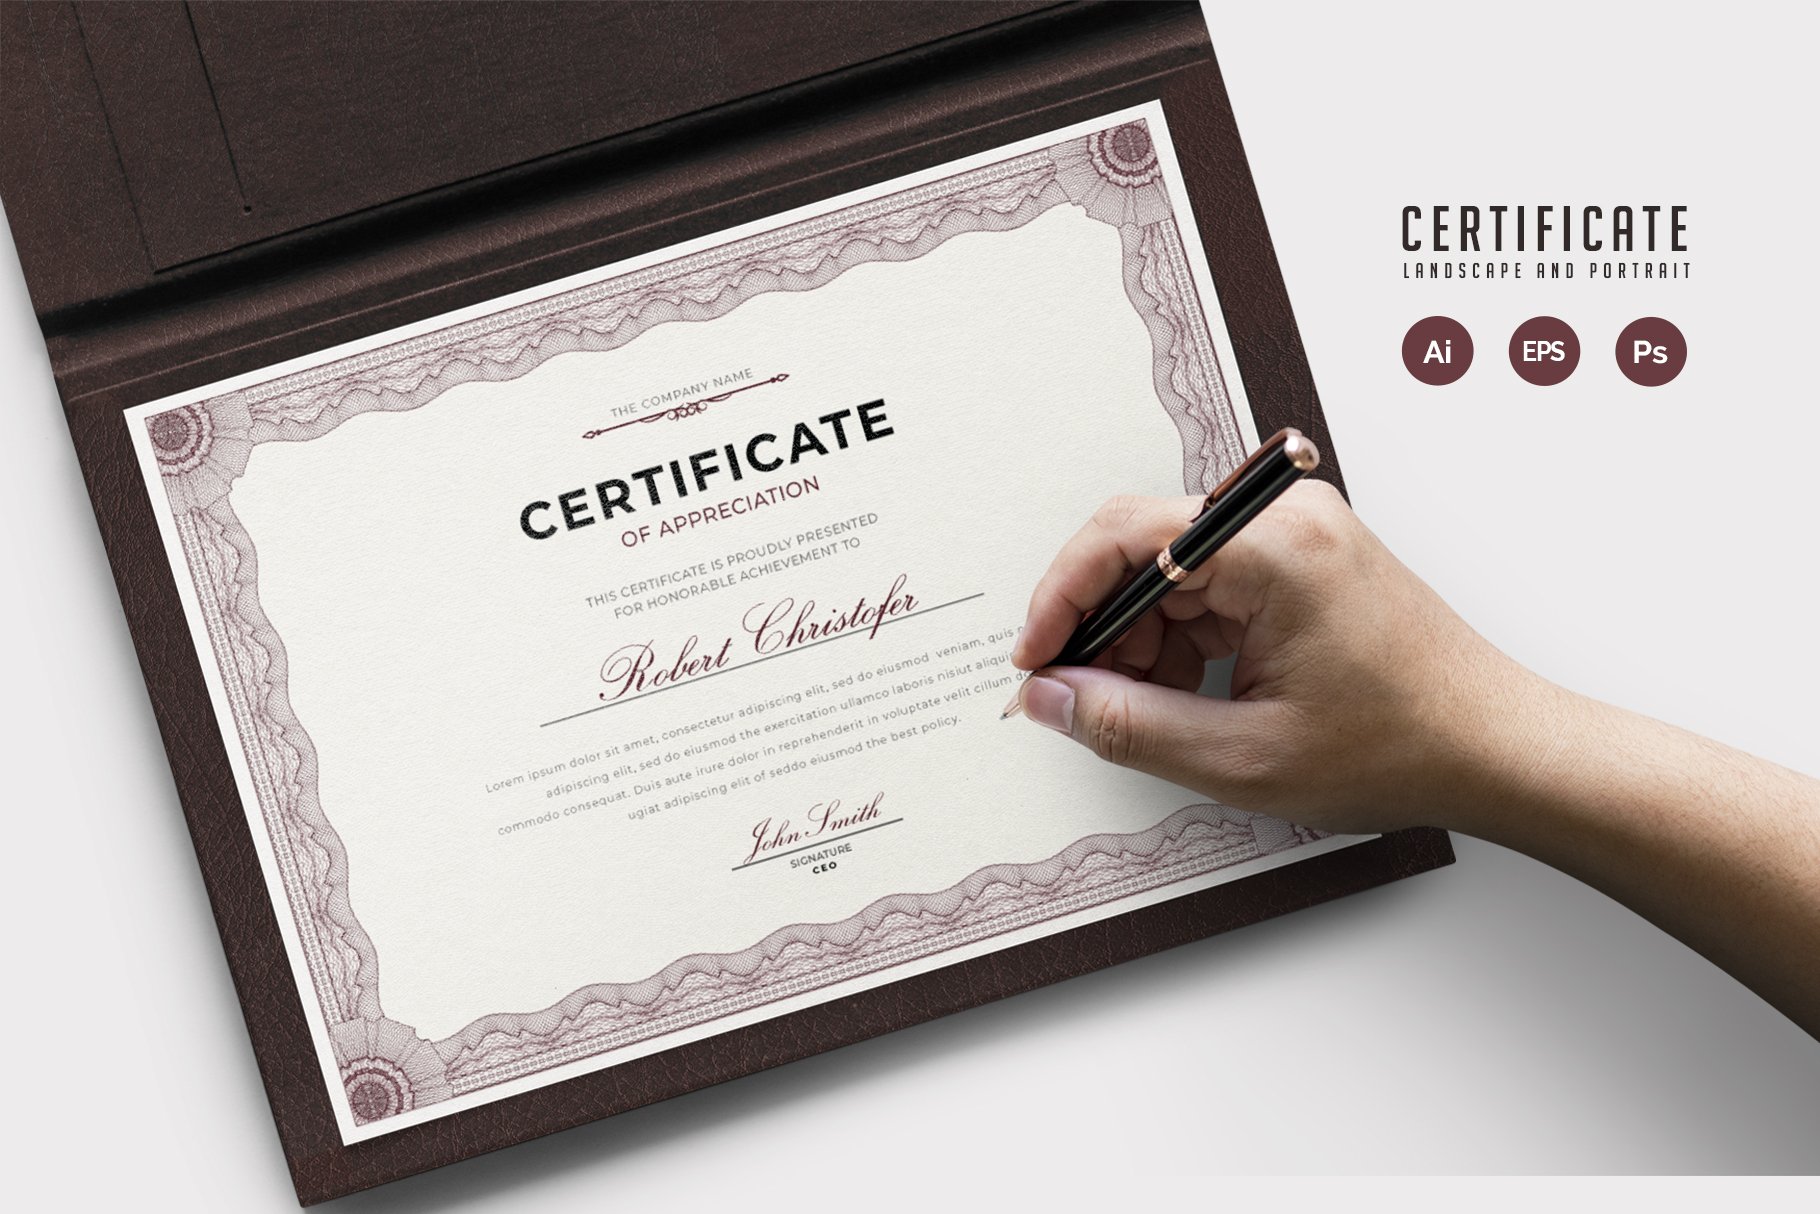 051. Clean Certificate Template cover image.